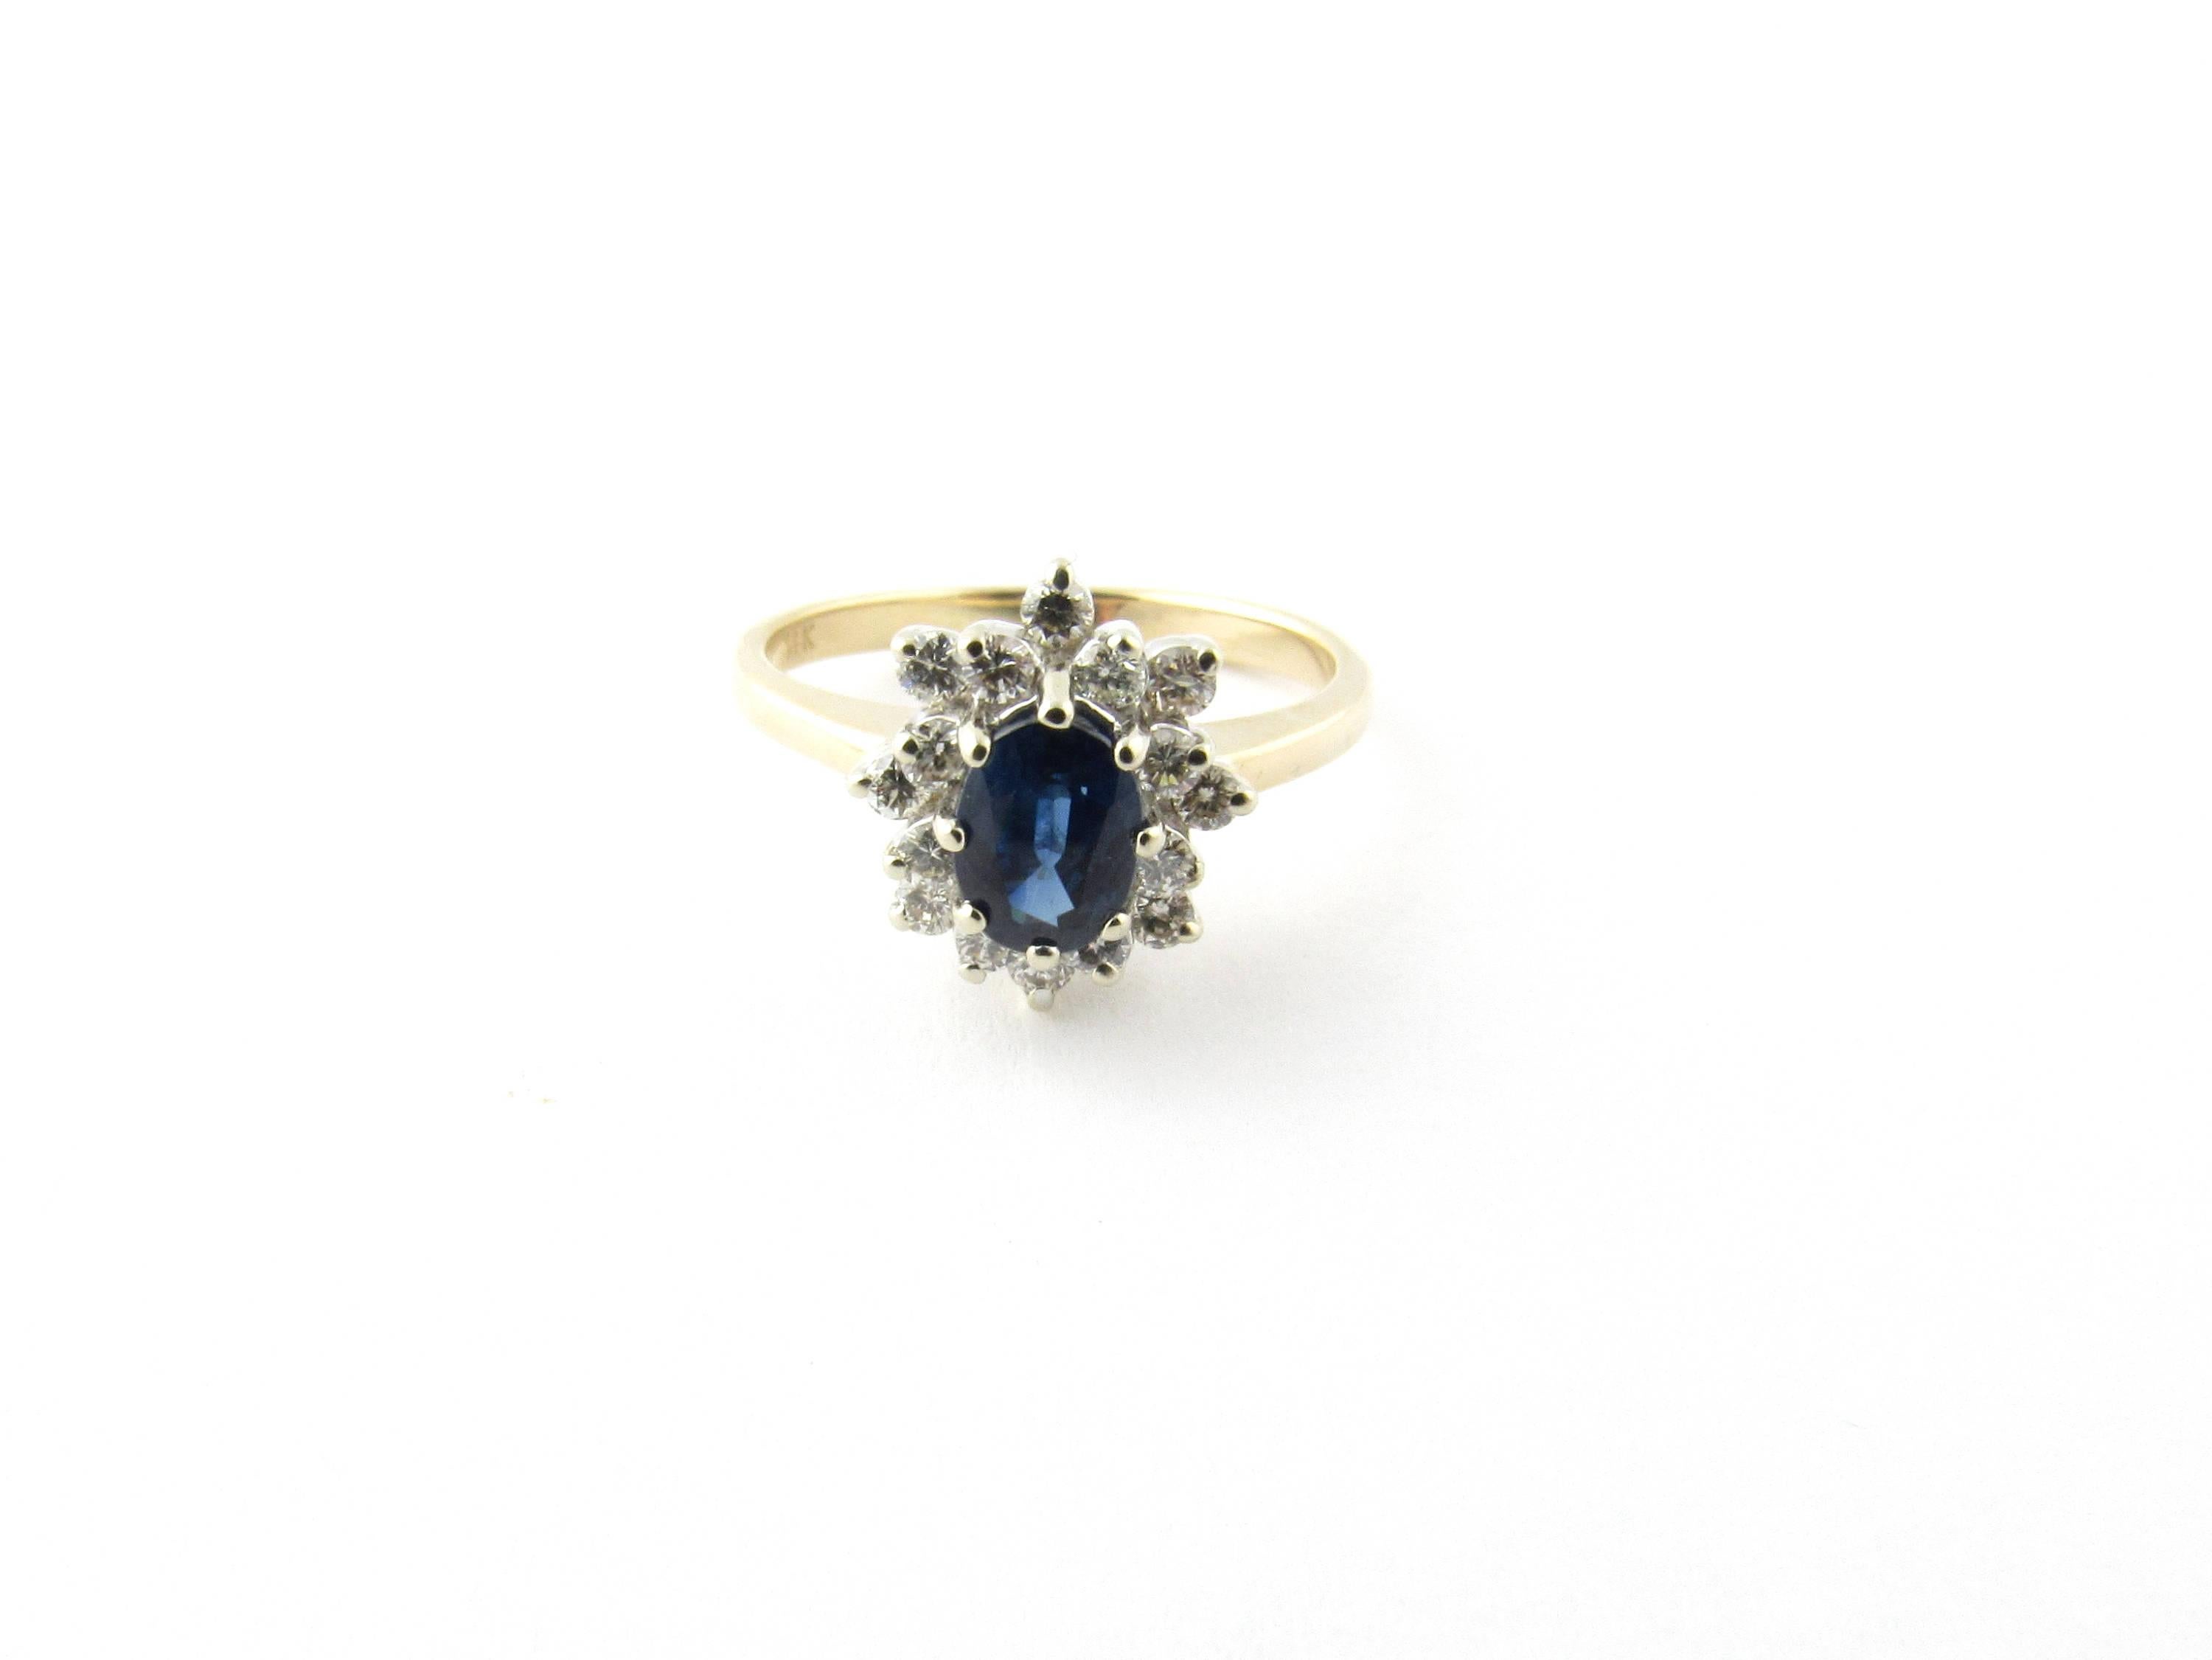 Vintage 14 Karat White and Yellow Gold Sapphire and Diamond Ring Size 5.5-

This elegant ring features one oval sapphire (7 mm x 5 mm) surrounded by 16 round brilliant cut diamonds set in classic 14K white gold. Top of ring measures 11 mm x 10 mm.